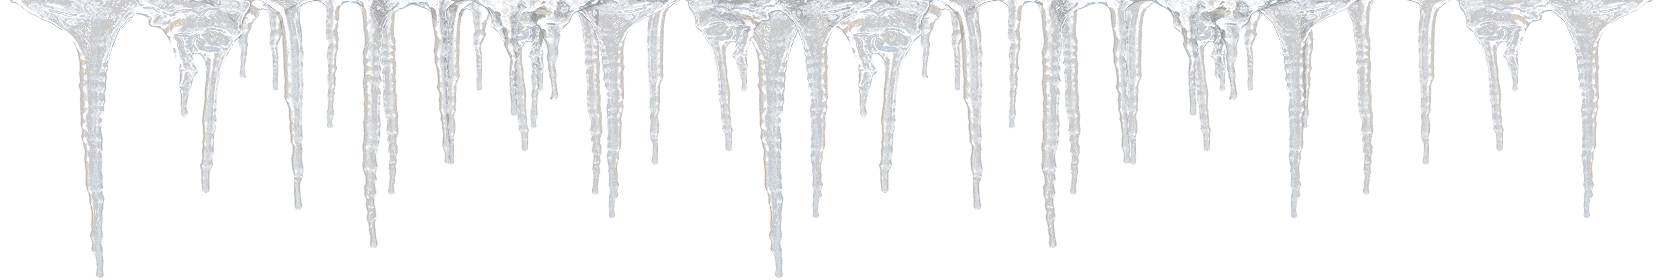 Icicle clipart #6, Download drawings